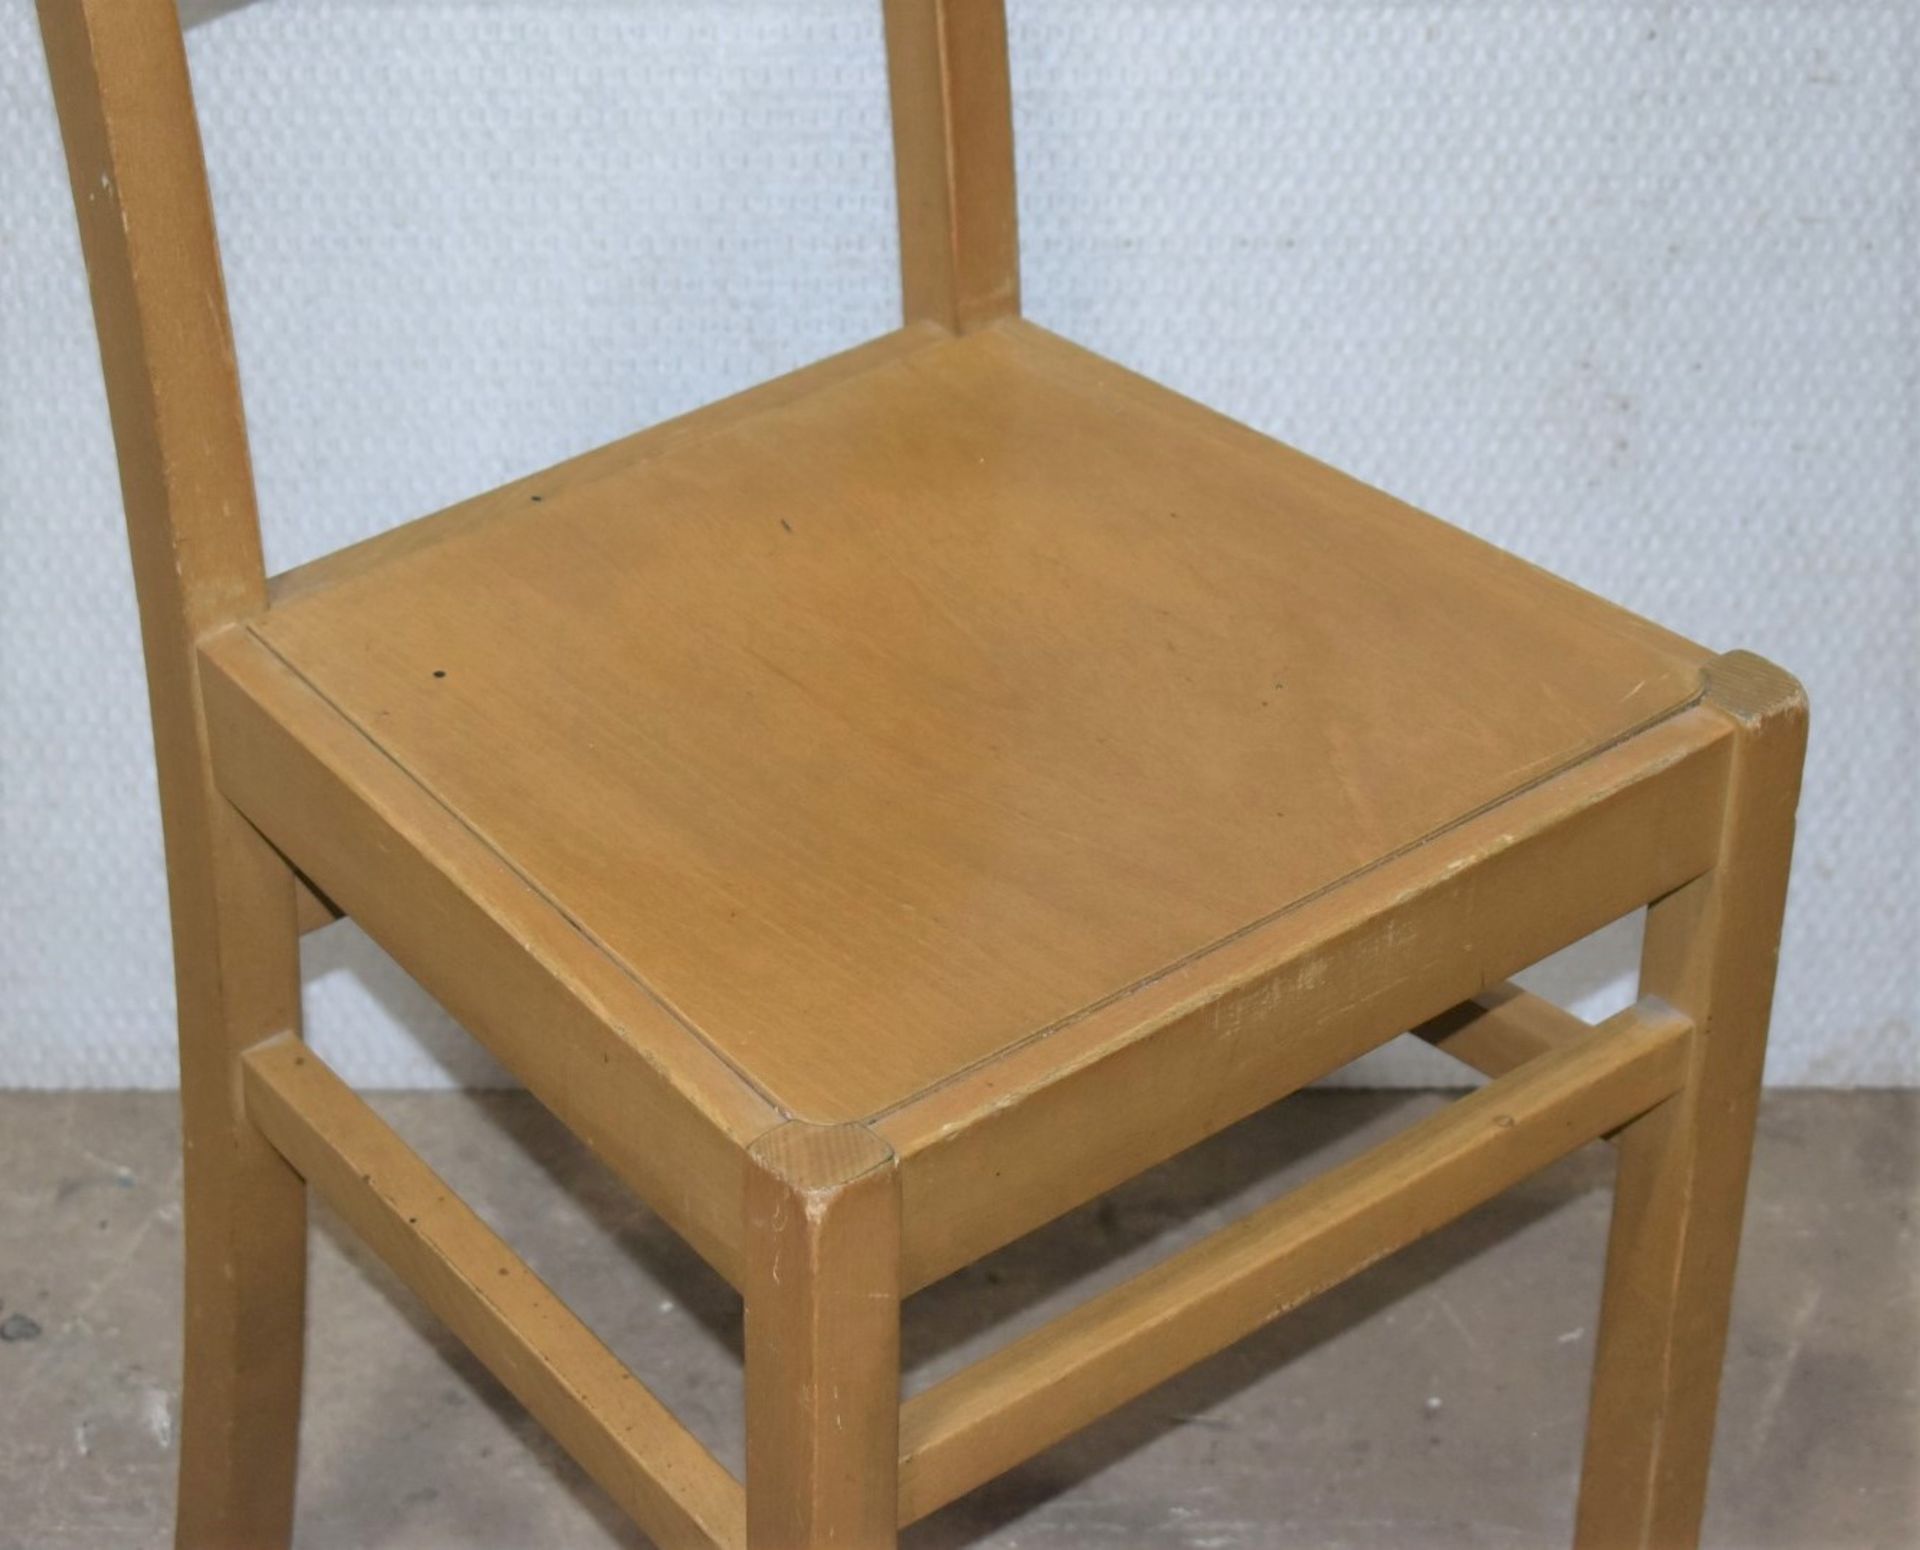 8 x Restaurant Dining Chairs With a Light Wood Finish - Image 4 of 5